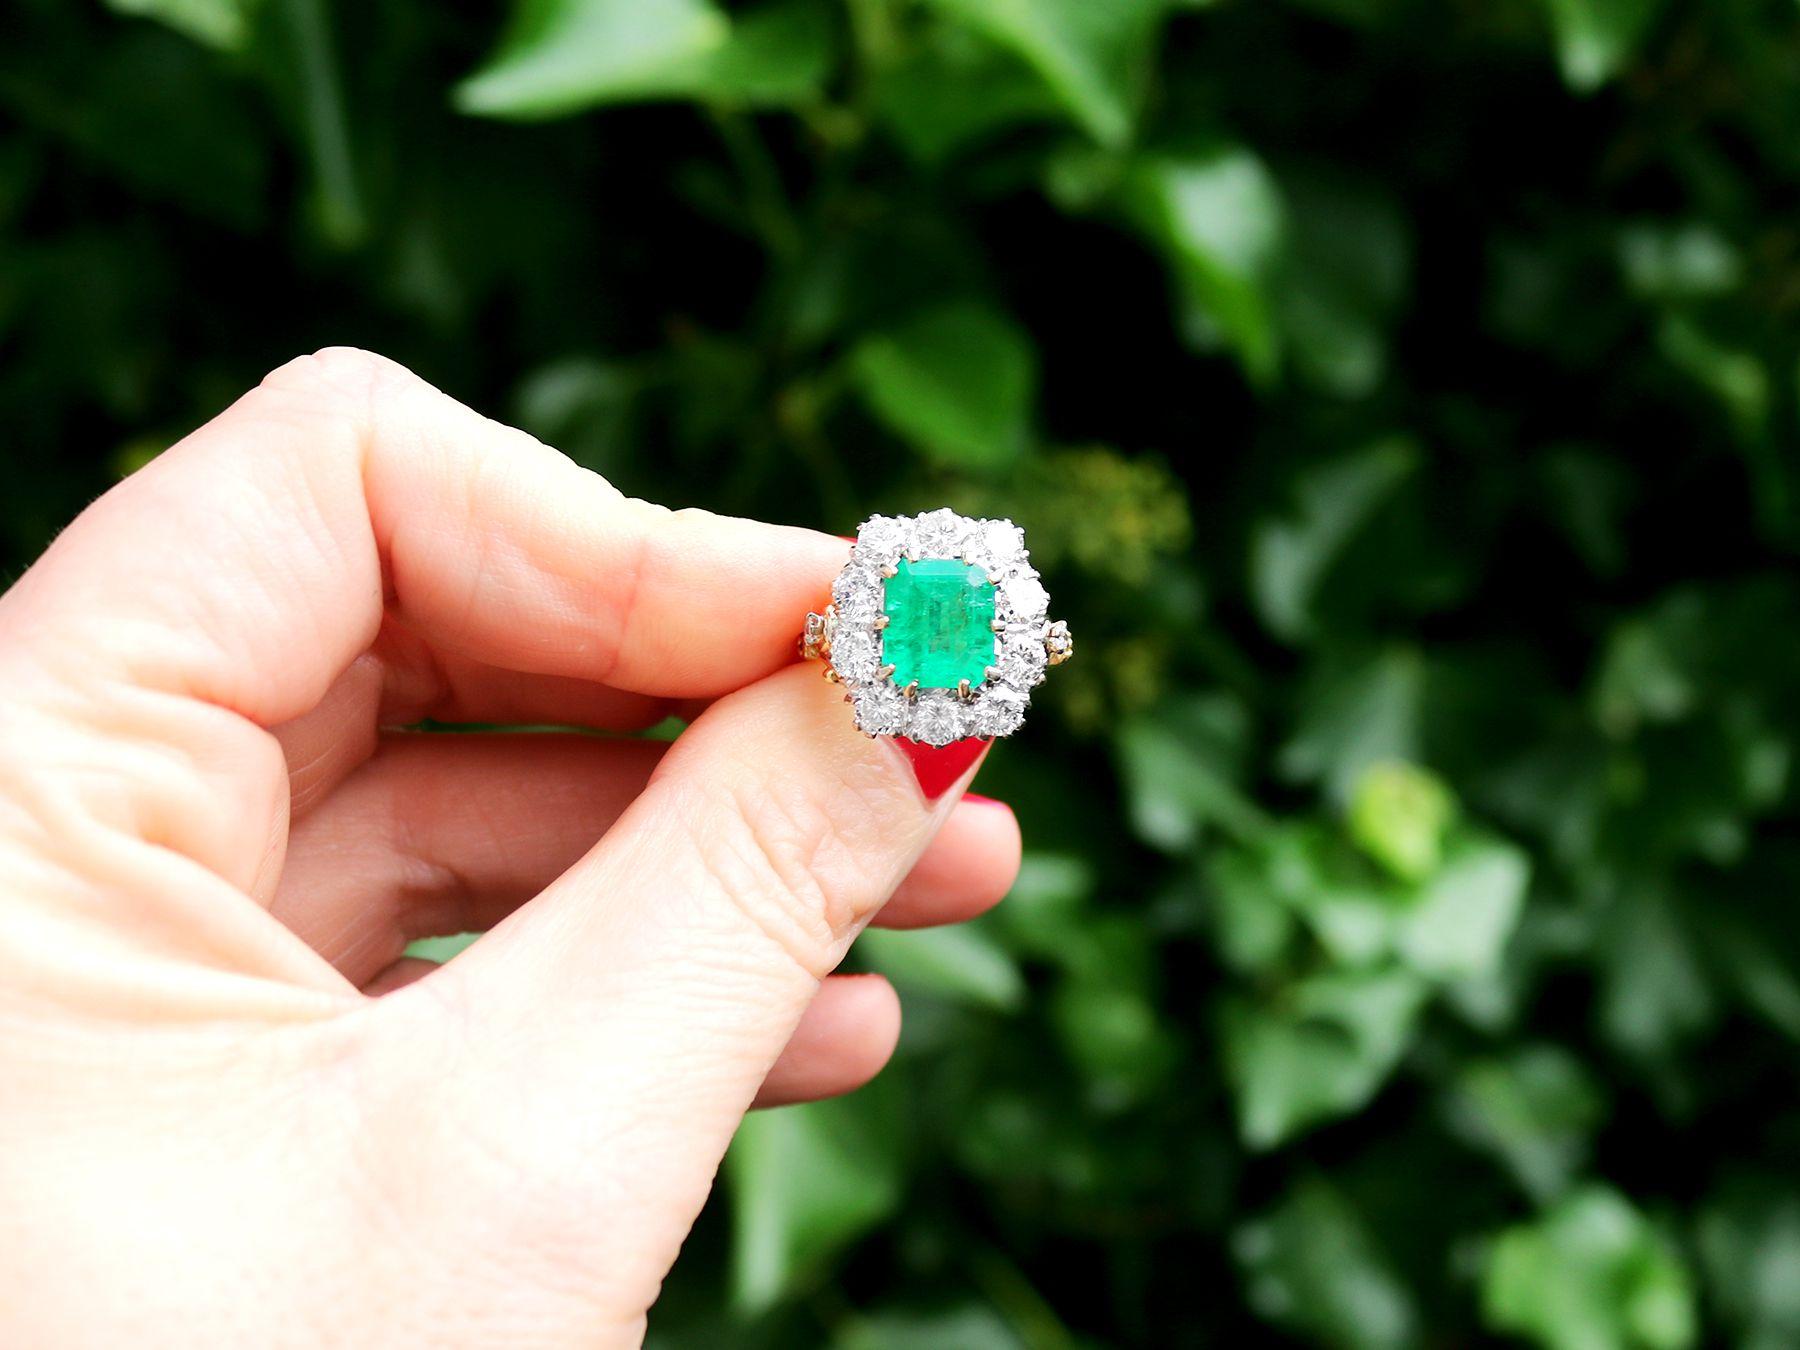 A stunning, fine and impressive vintage 3.60 carat GCS verified Zambian emerald and 1.85 carat diamond, 18 karat yellow gold, 18 karat white gold set cluster ring; an addition to our vintage jewelry and estate jewelry collections

This stunning,